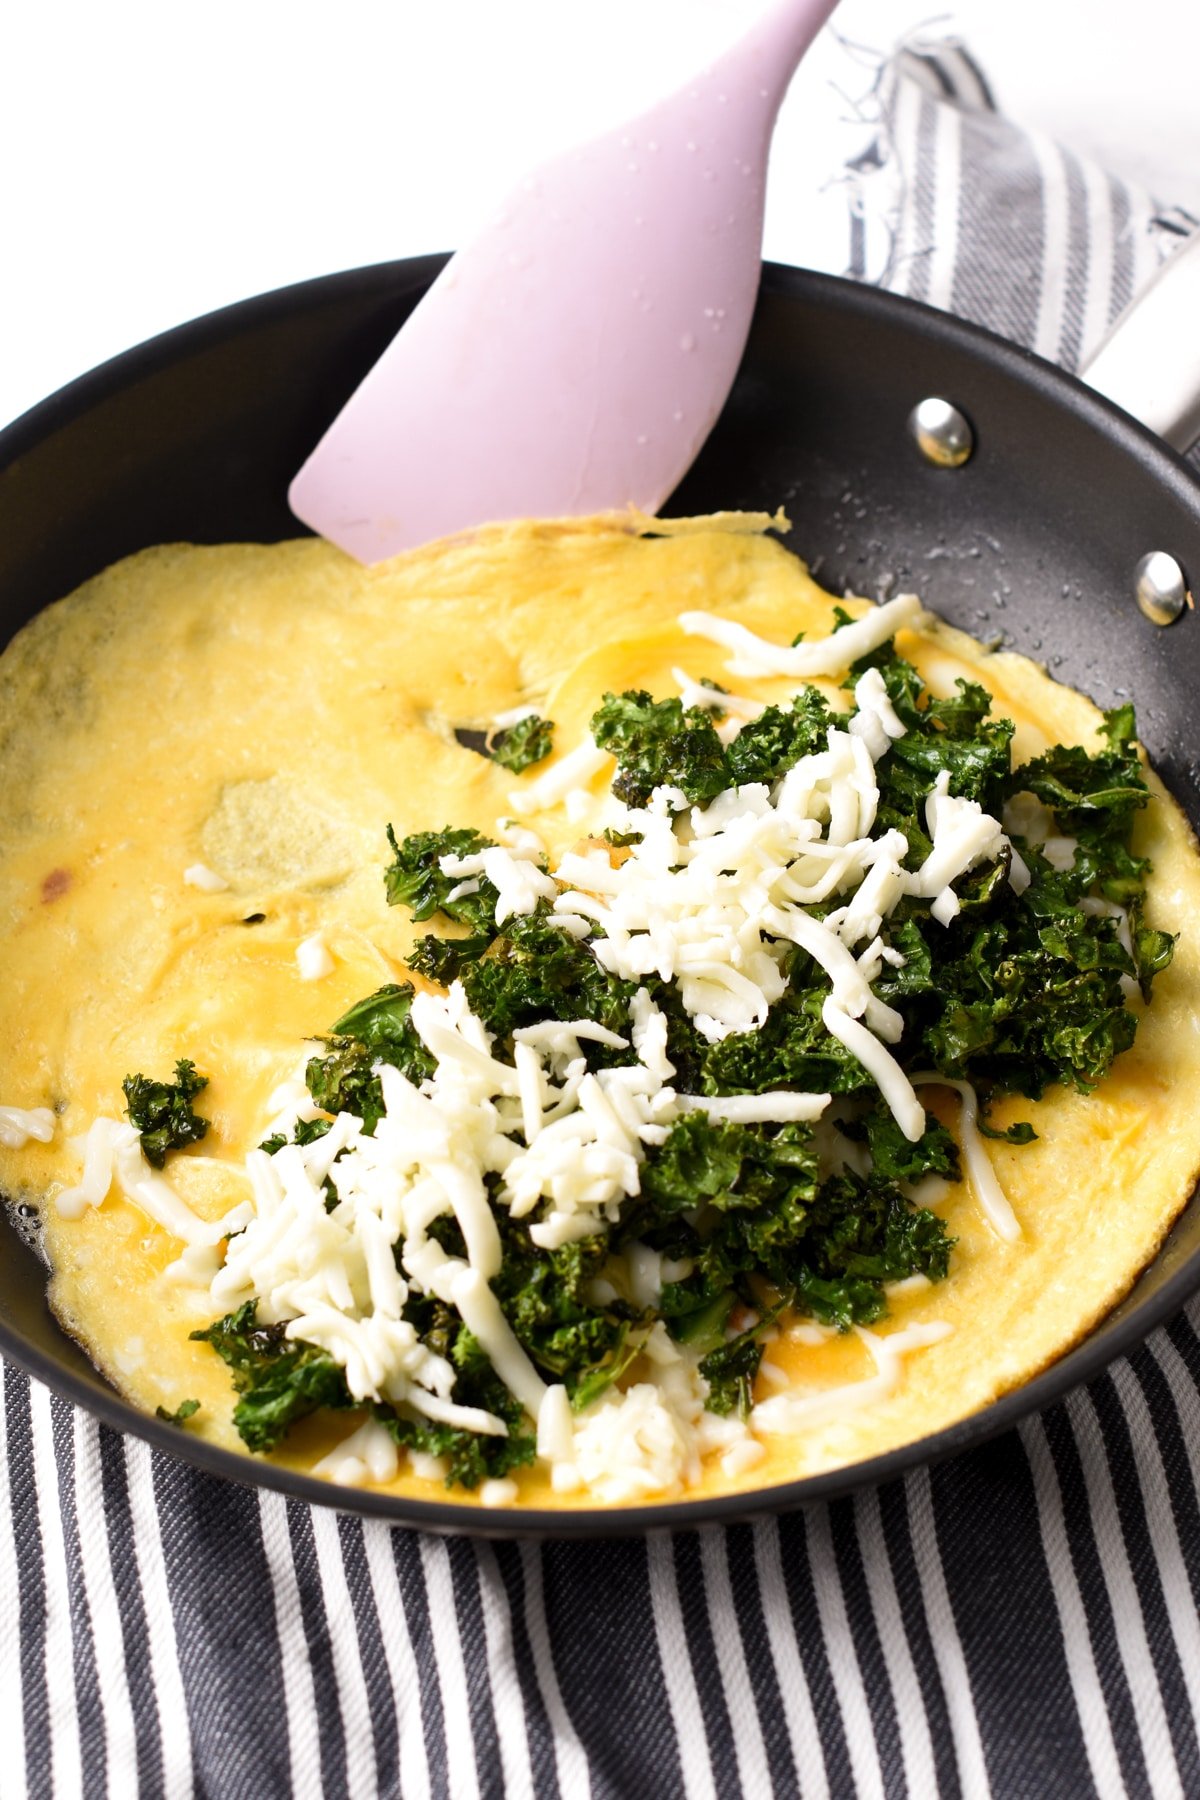 Kale Omelette recipe keto low carb cheese kale omelette